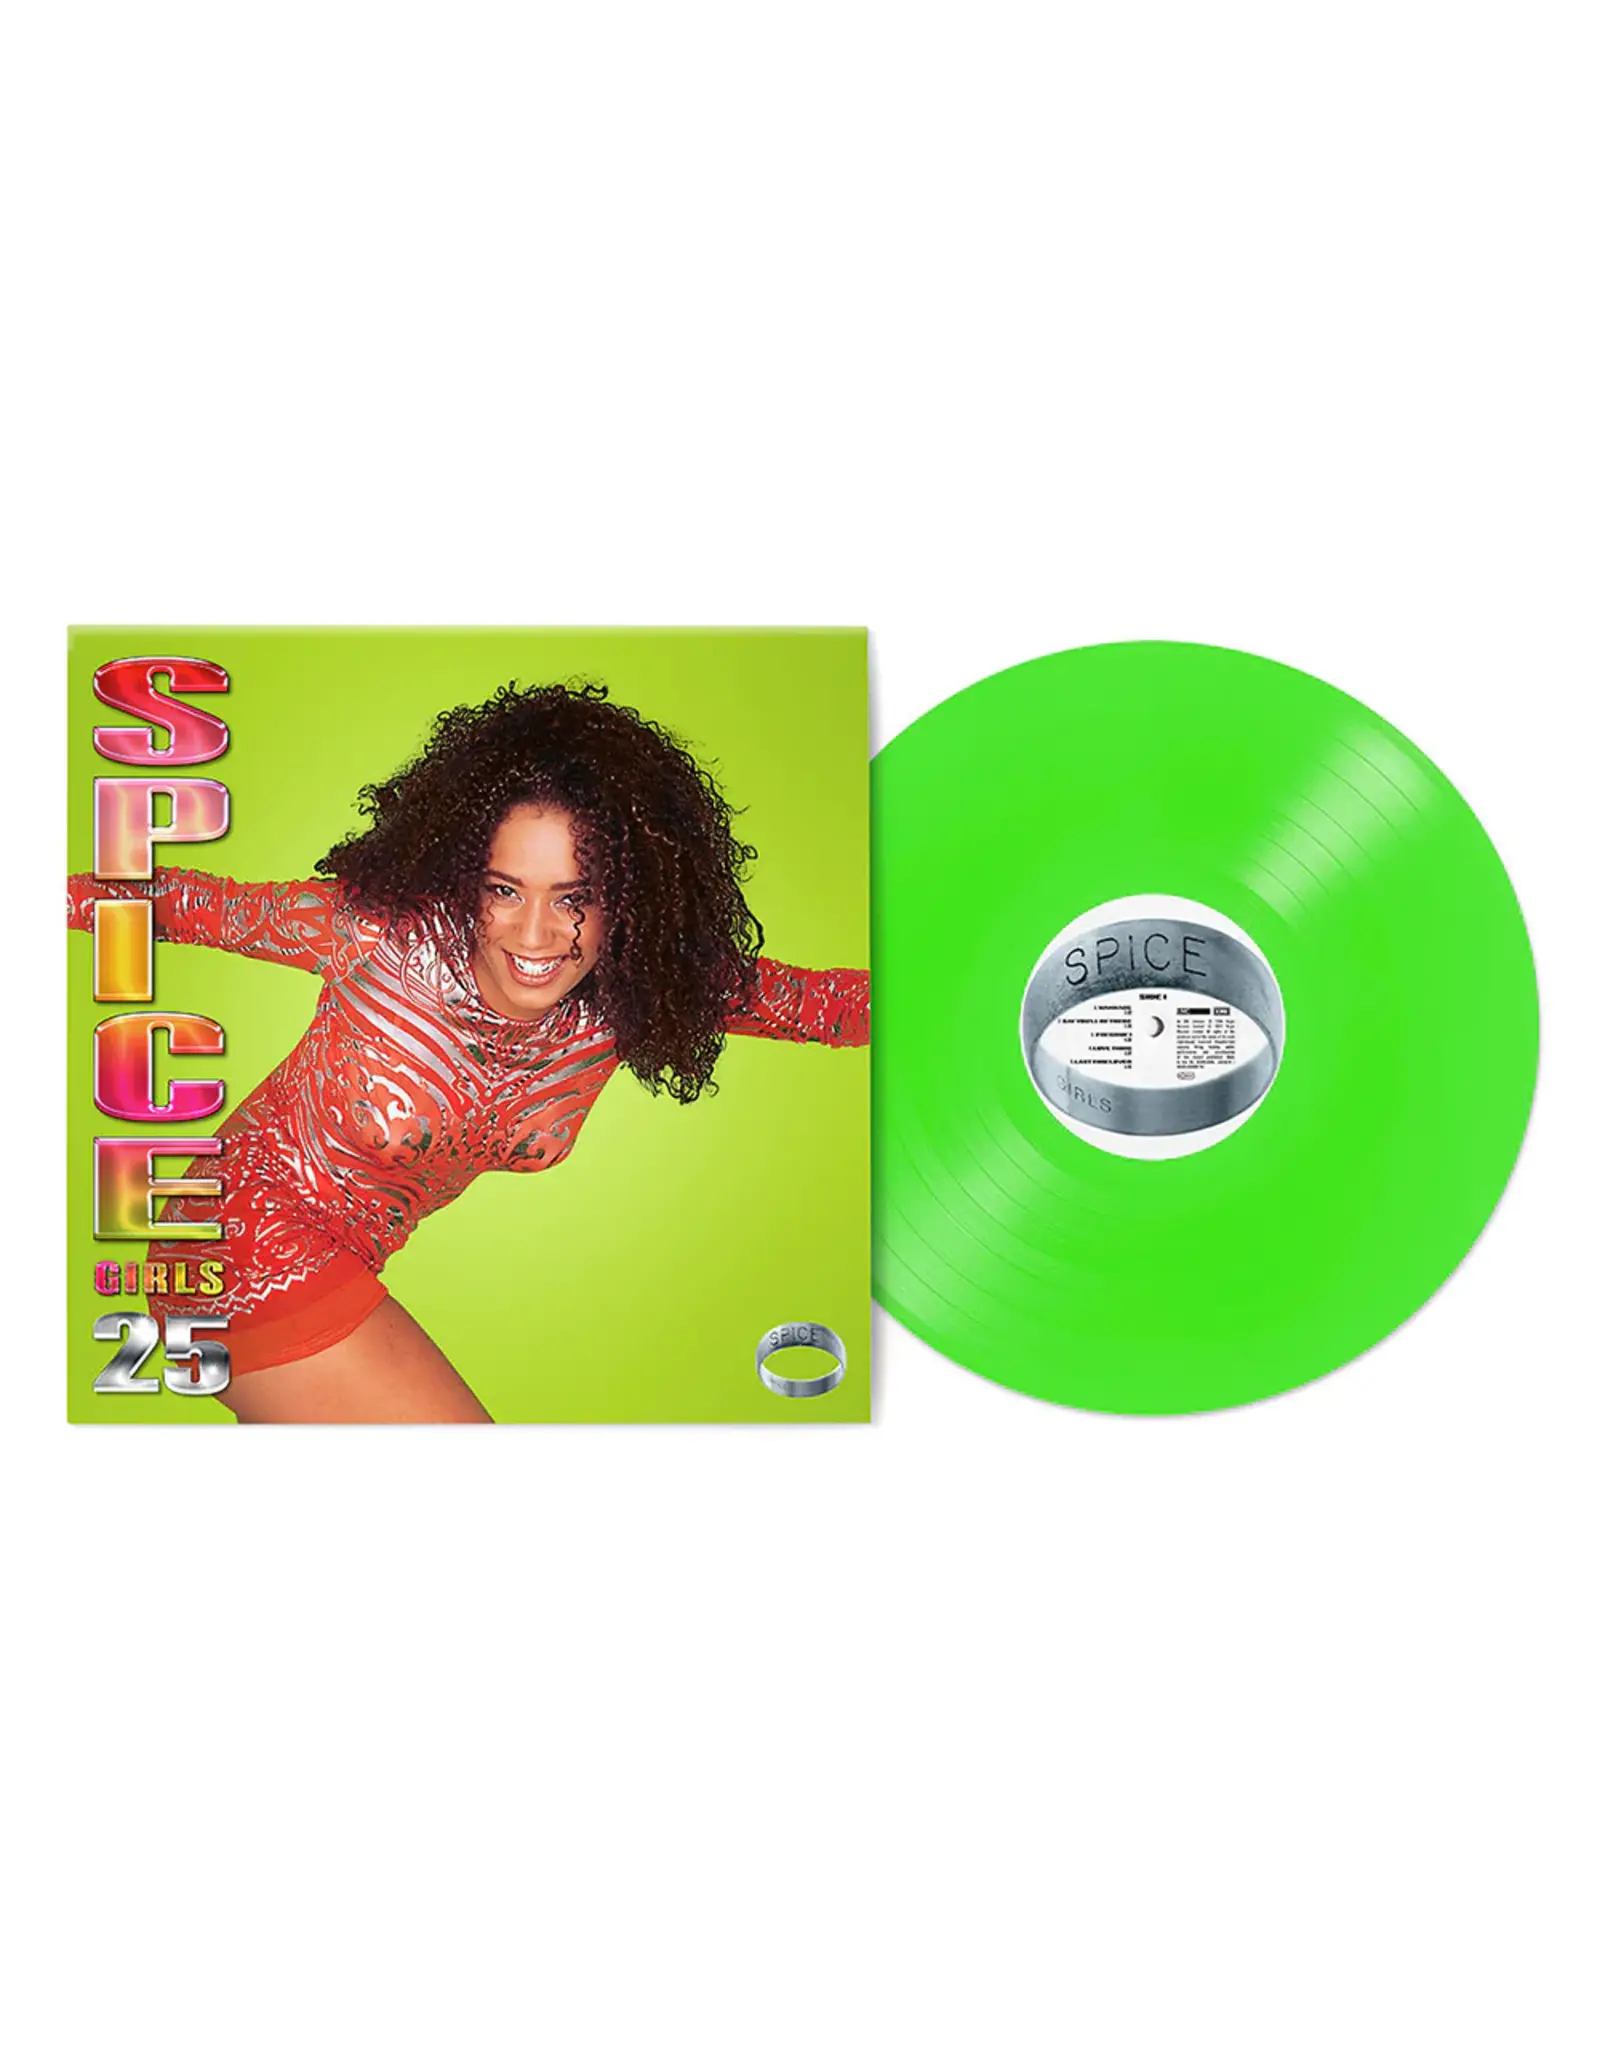 Spice Girls - Spice (25th Anniversary) (Scary Green Vinyl)